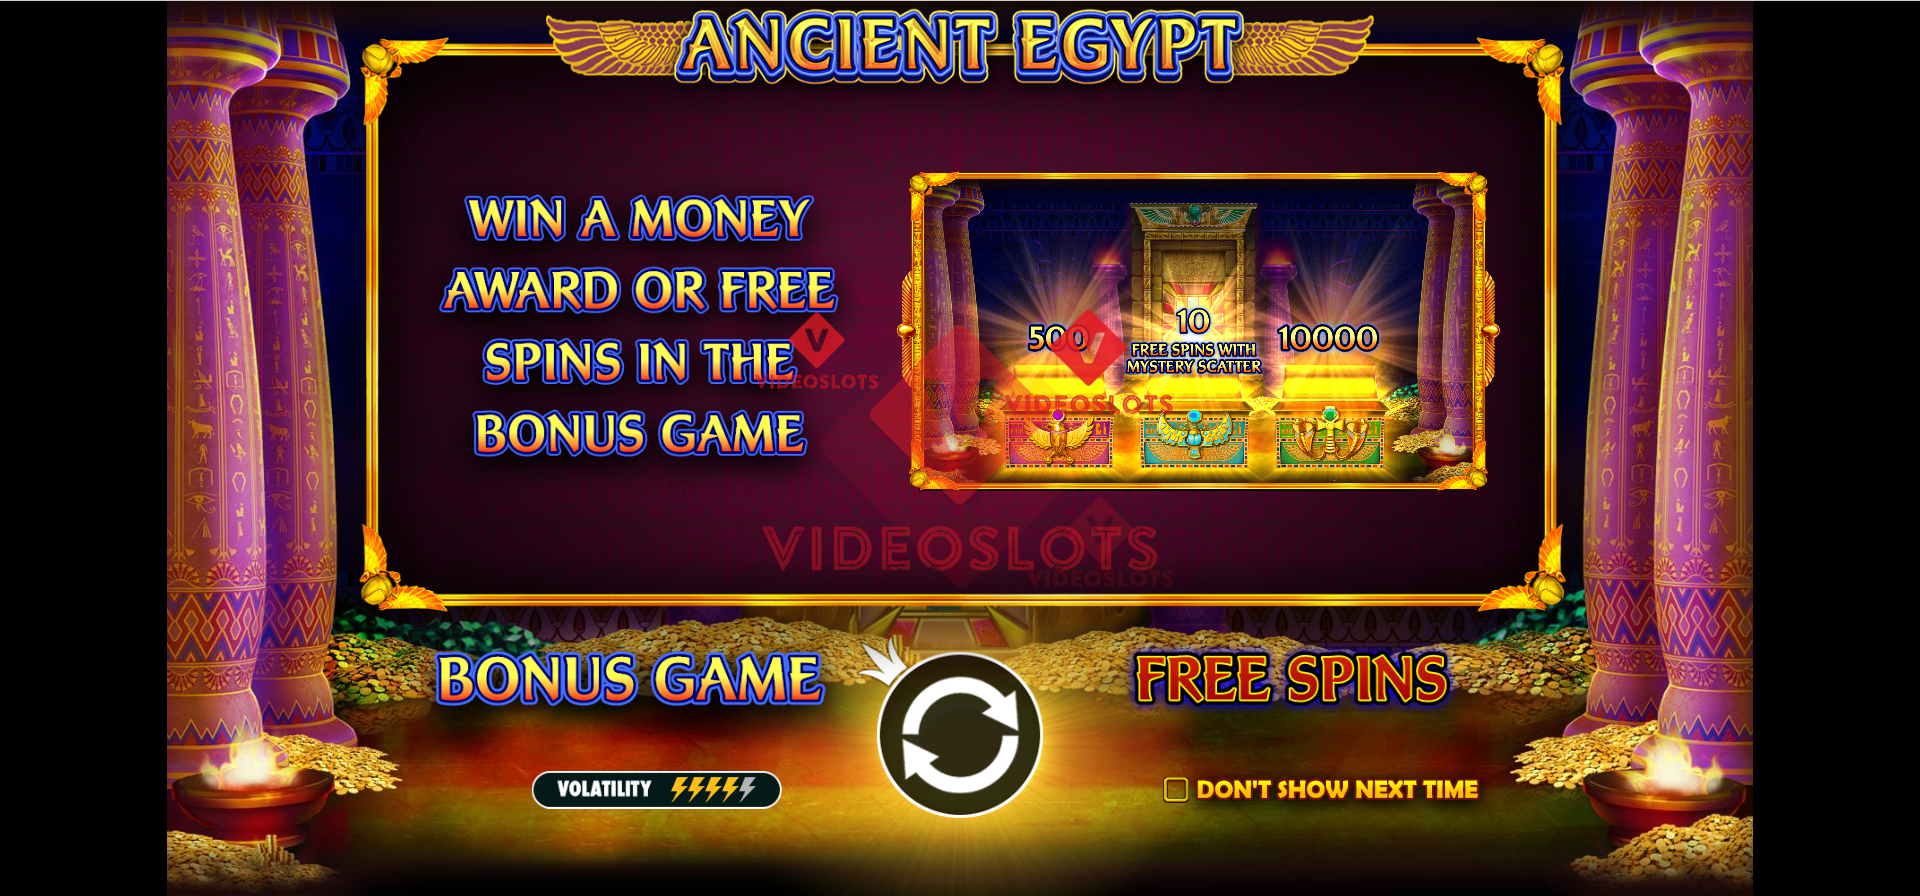 Game Intro for Ancient Egypt slot by Pragmatic Play